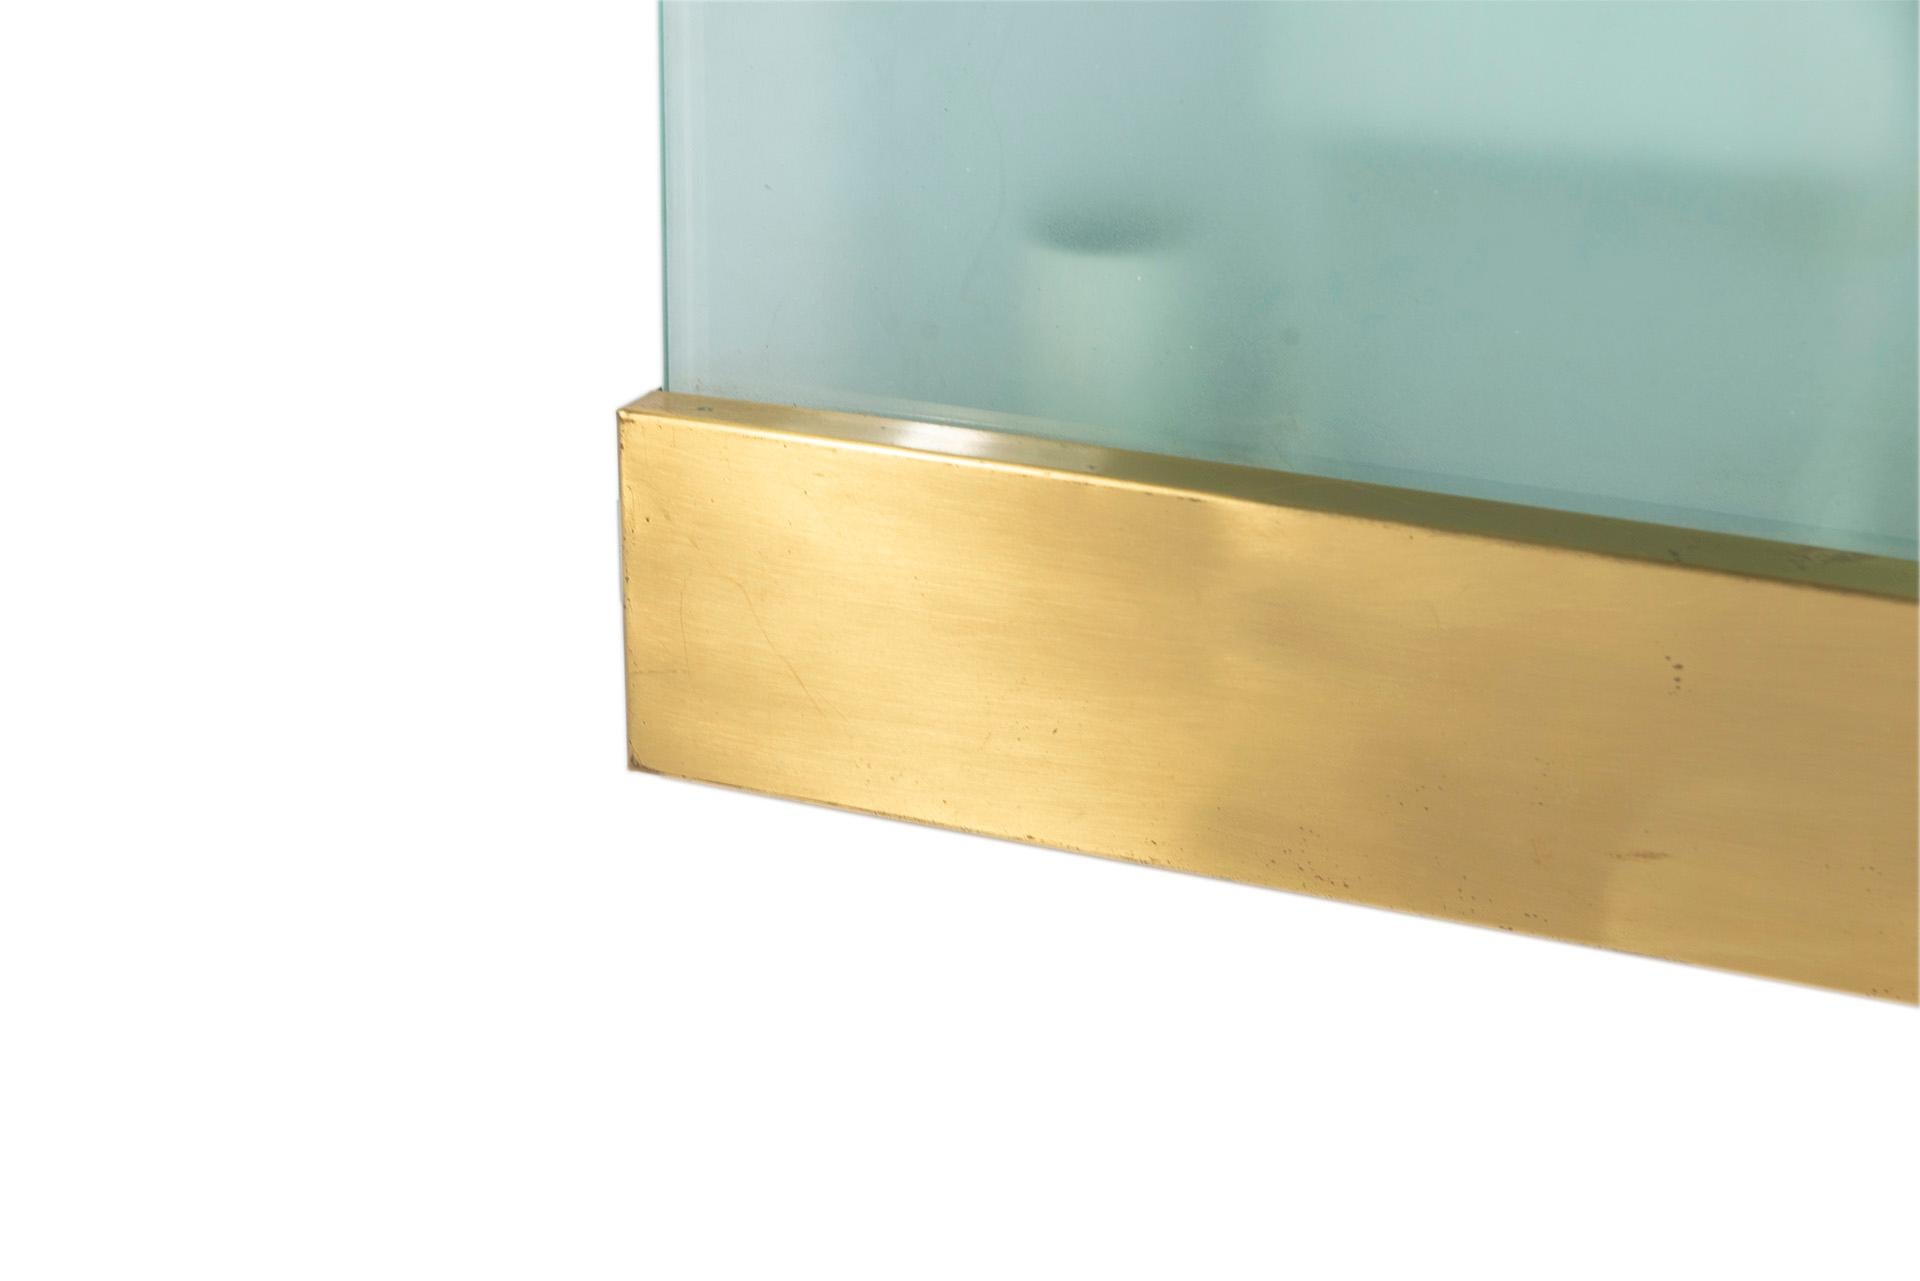 Angelo Brotto sconce,
Esperia edition label,
glass, lecquered metal and brass gilded,
circa 1970, Italy.

Measures: Height 45 cm, width 45 cm, depth 5 cm.

Angelo Brotto (1914 - 2002) is an Italian artist and designer recognized for his lighting and